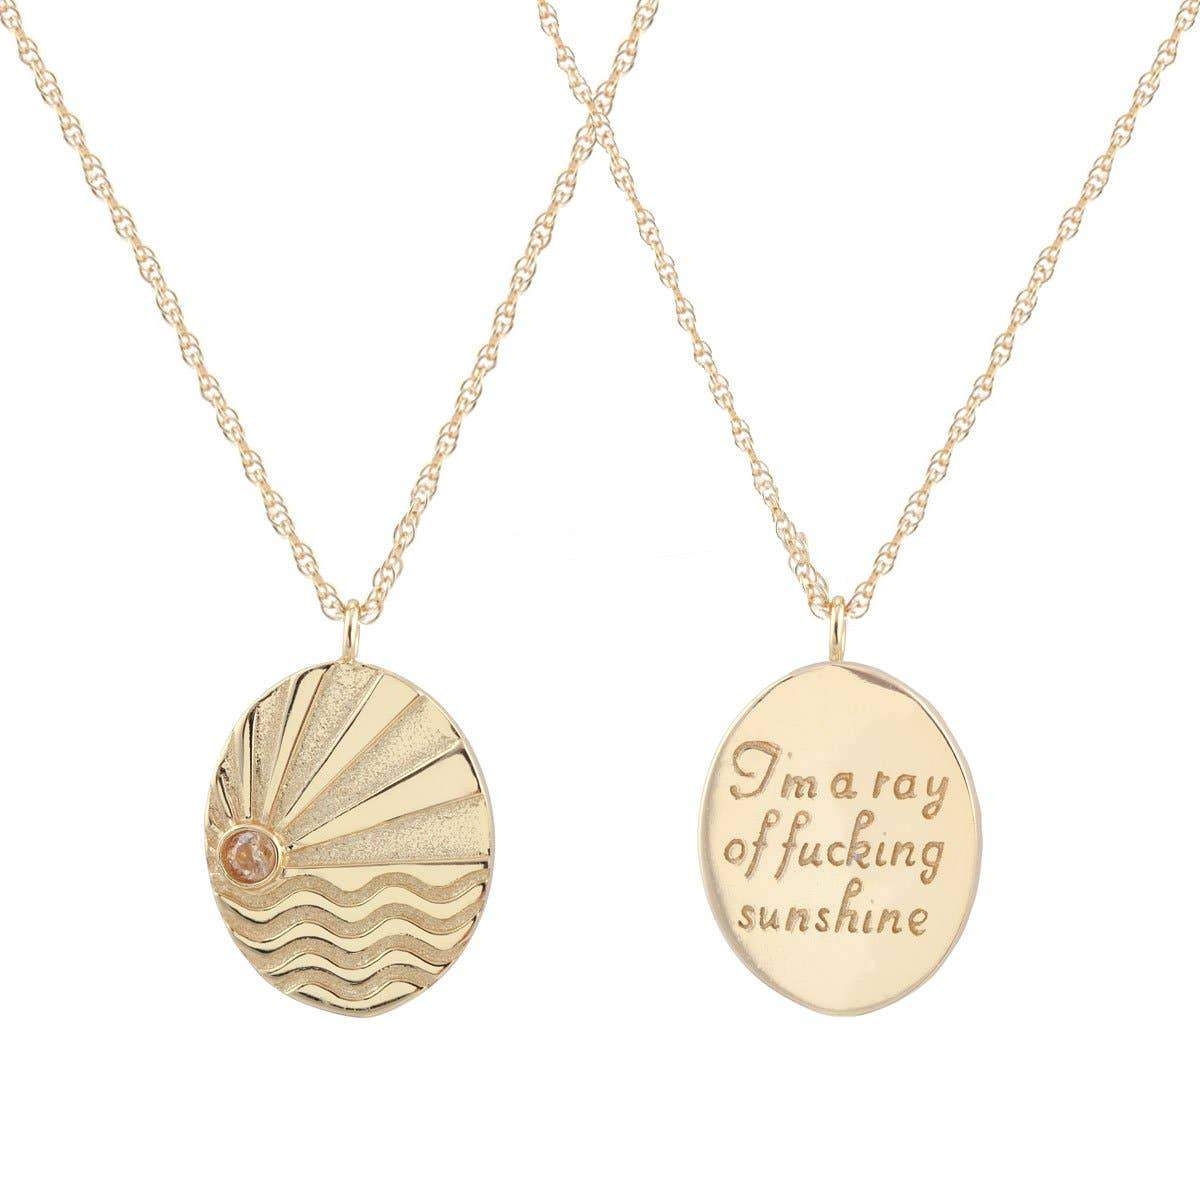 Ray of Sunshine Charm Necklace- Gold Vermeil Necklaces Kris Nations 